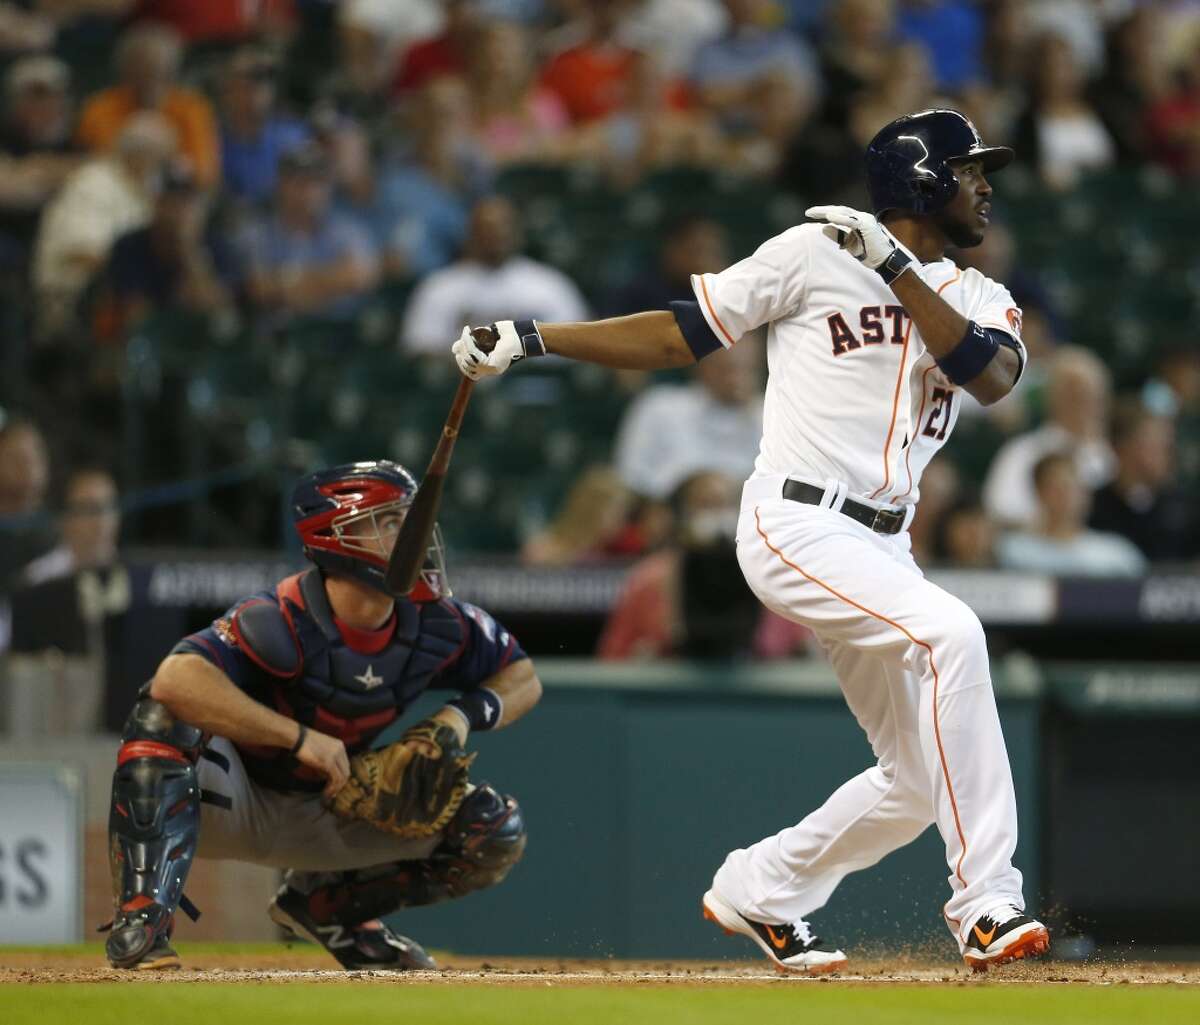 August 13: Twins 3, Astros 1 Astros center fielder Dexter Fowler had a hit in his return from the disabled list.